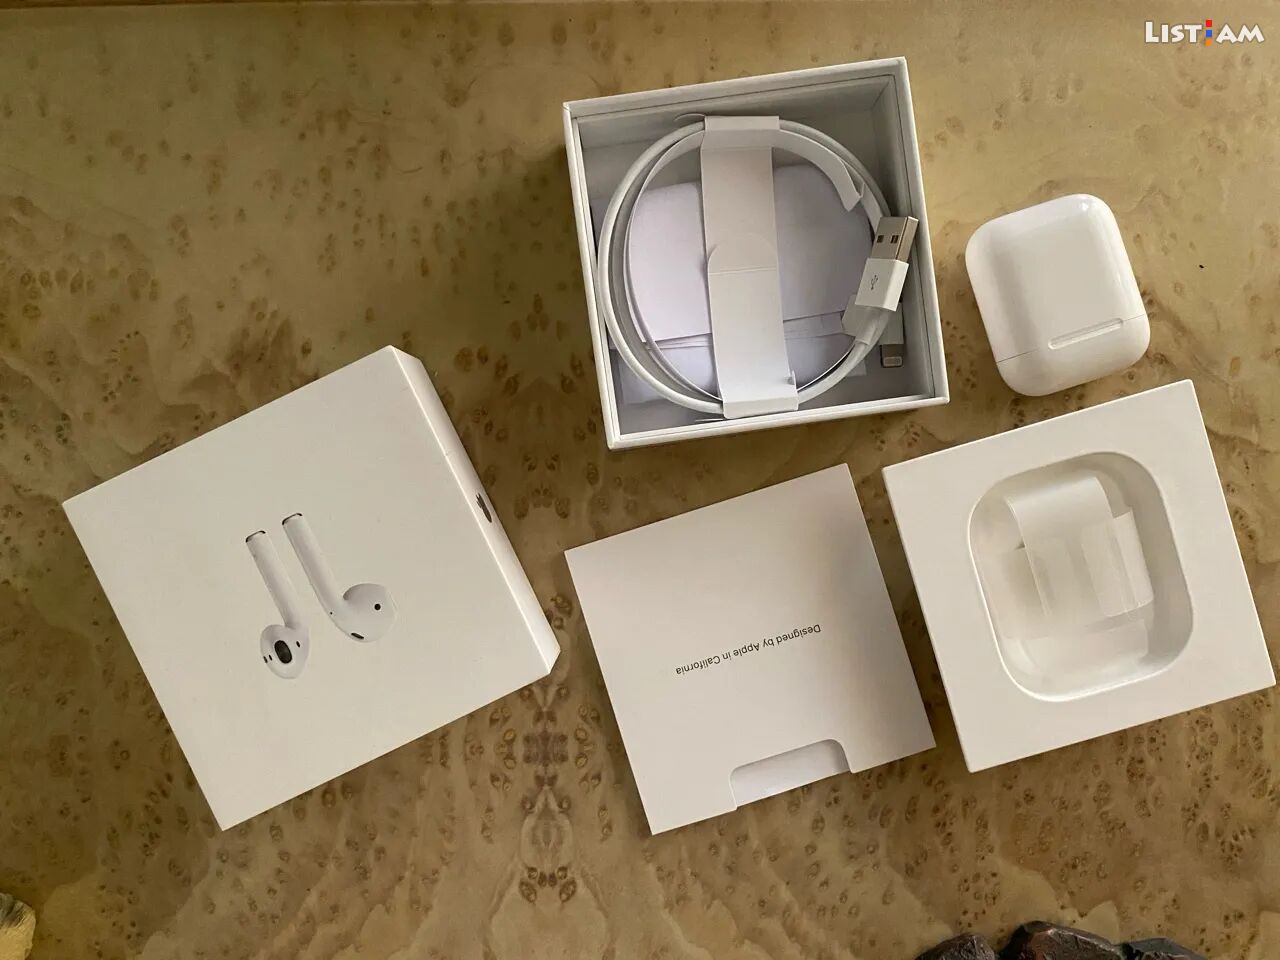 Airpods 2 series